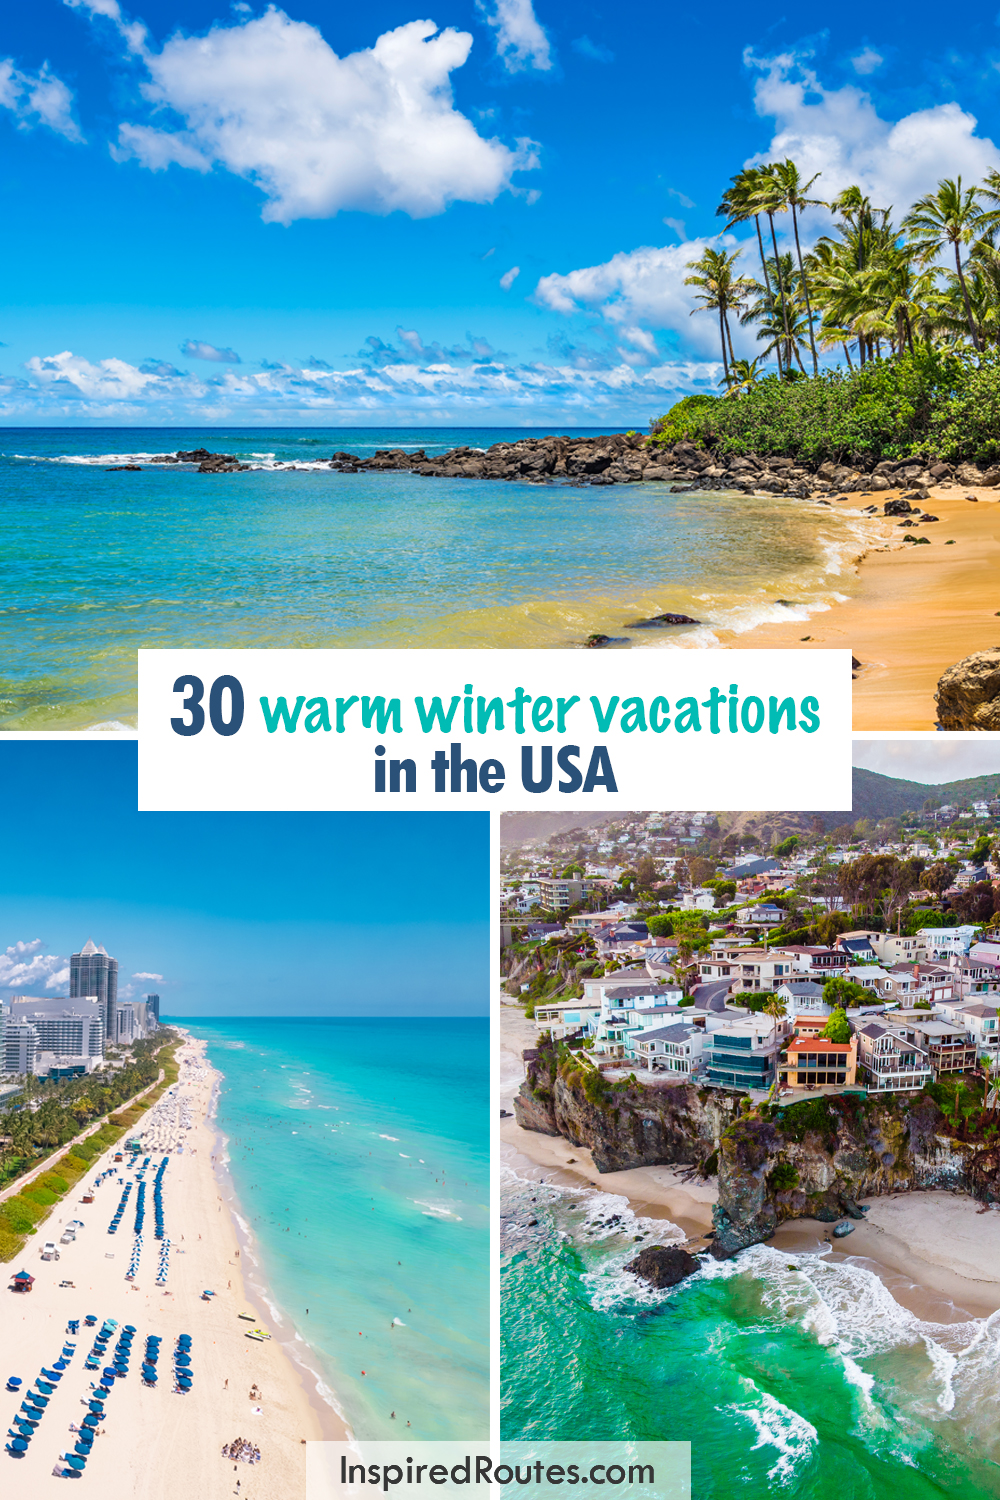 30 warm winter vacations in the USA with 3 photos of beaches and coastlines